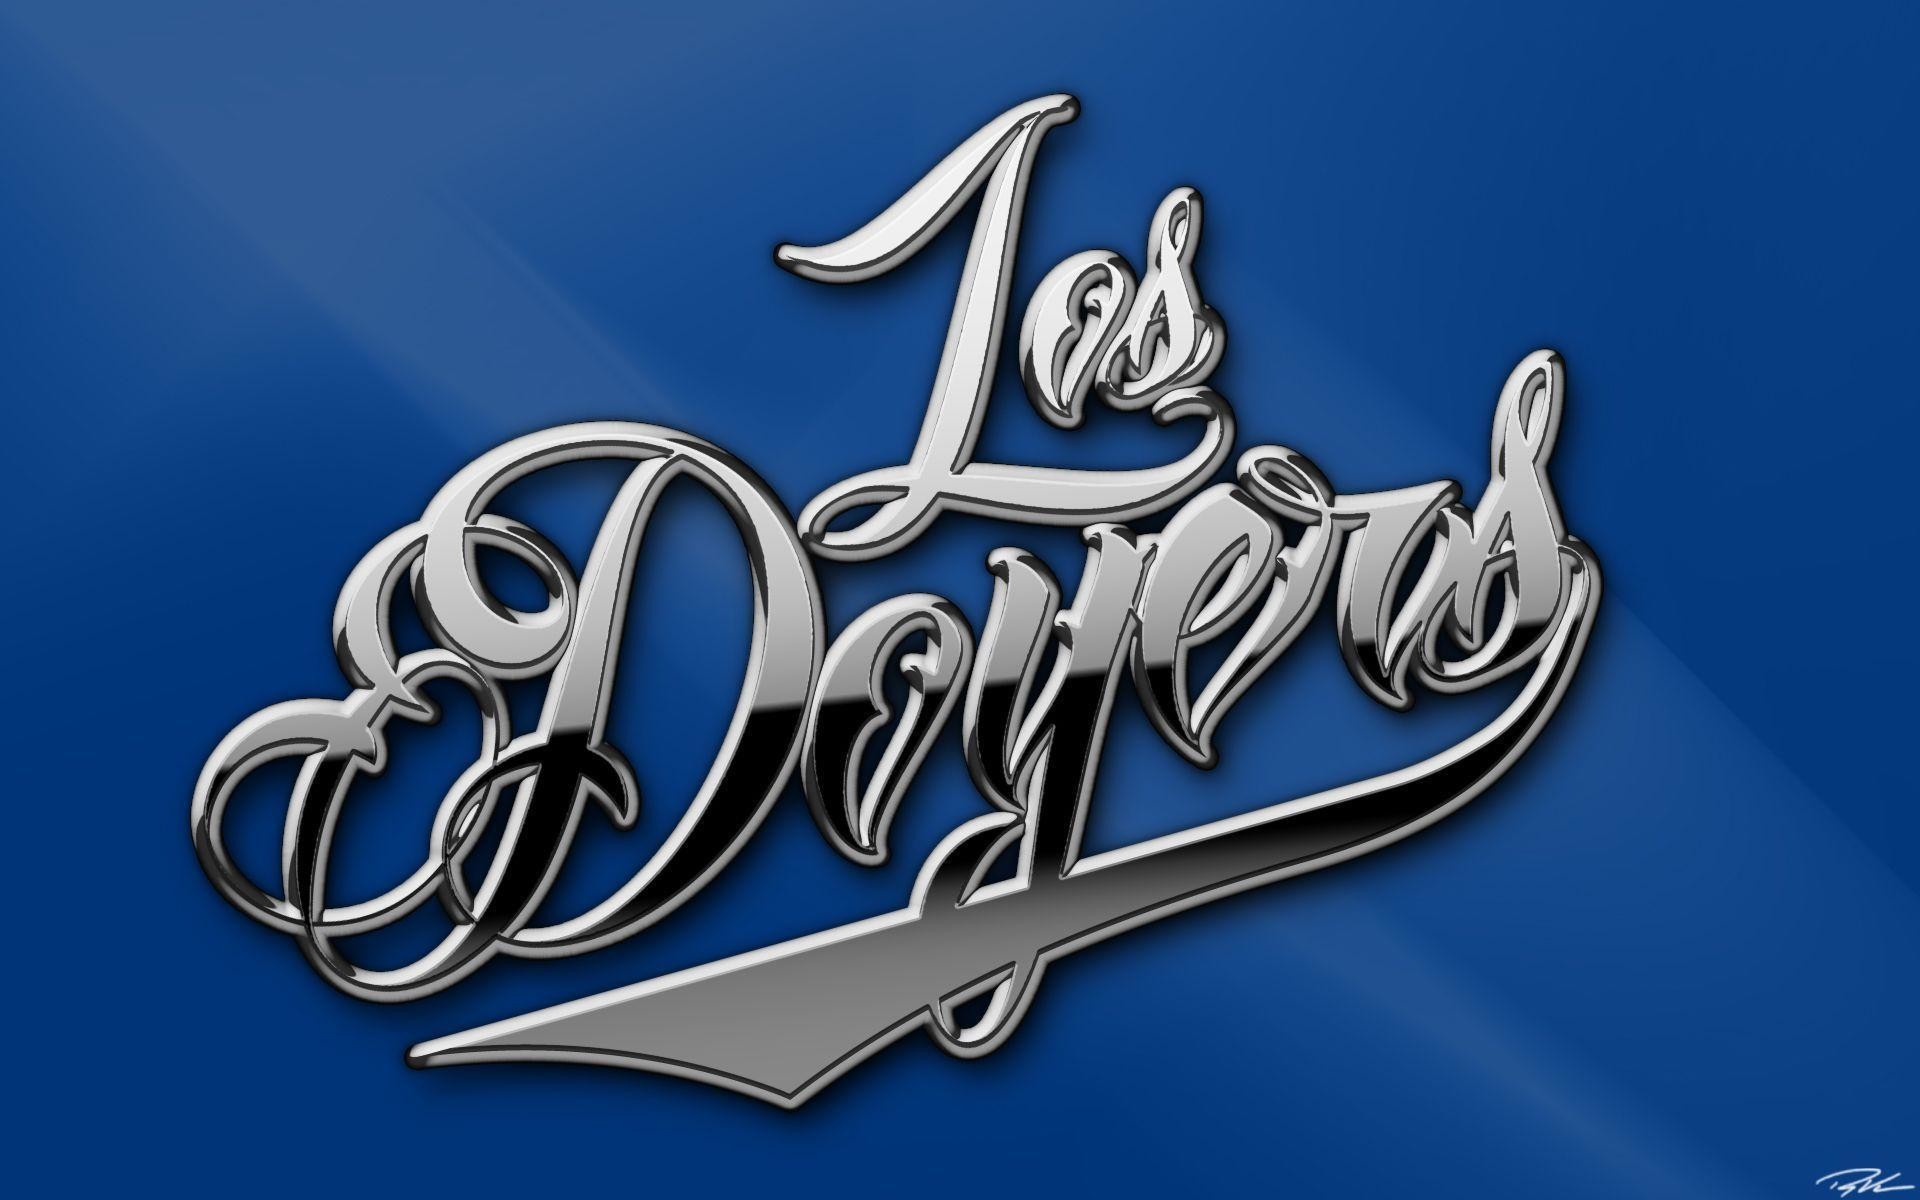 1920x1200 Los Angeles Dodgers wallpapers | Los Angeles Dodgers background .